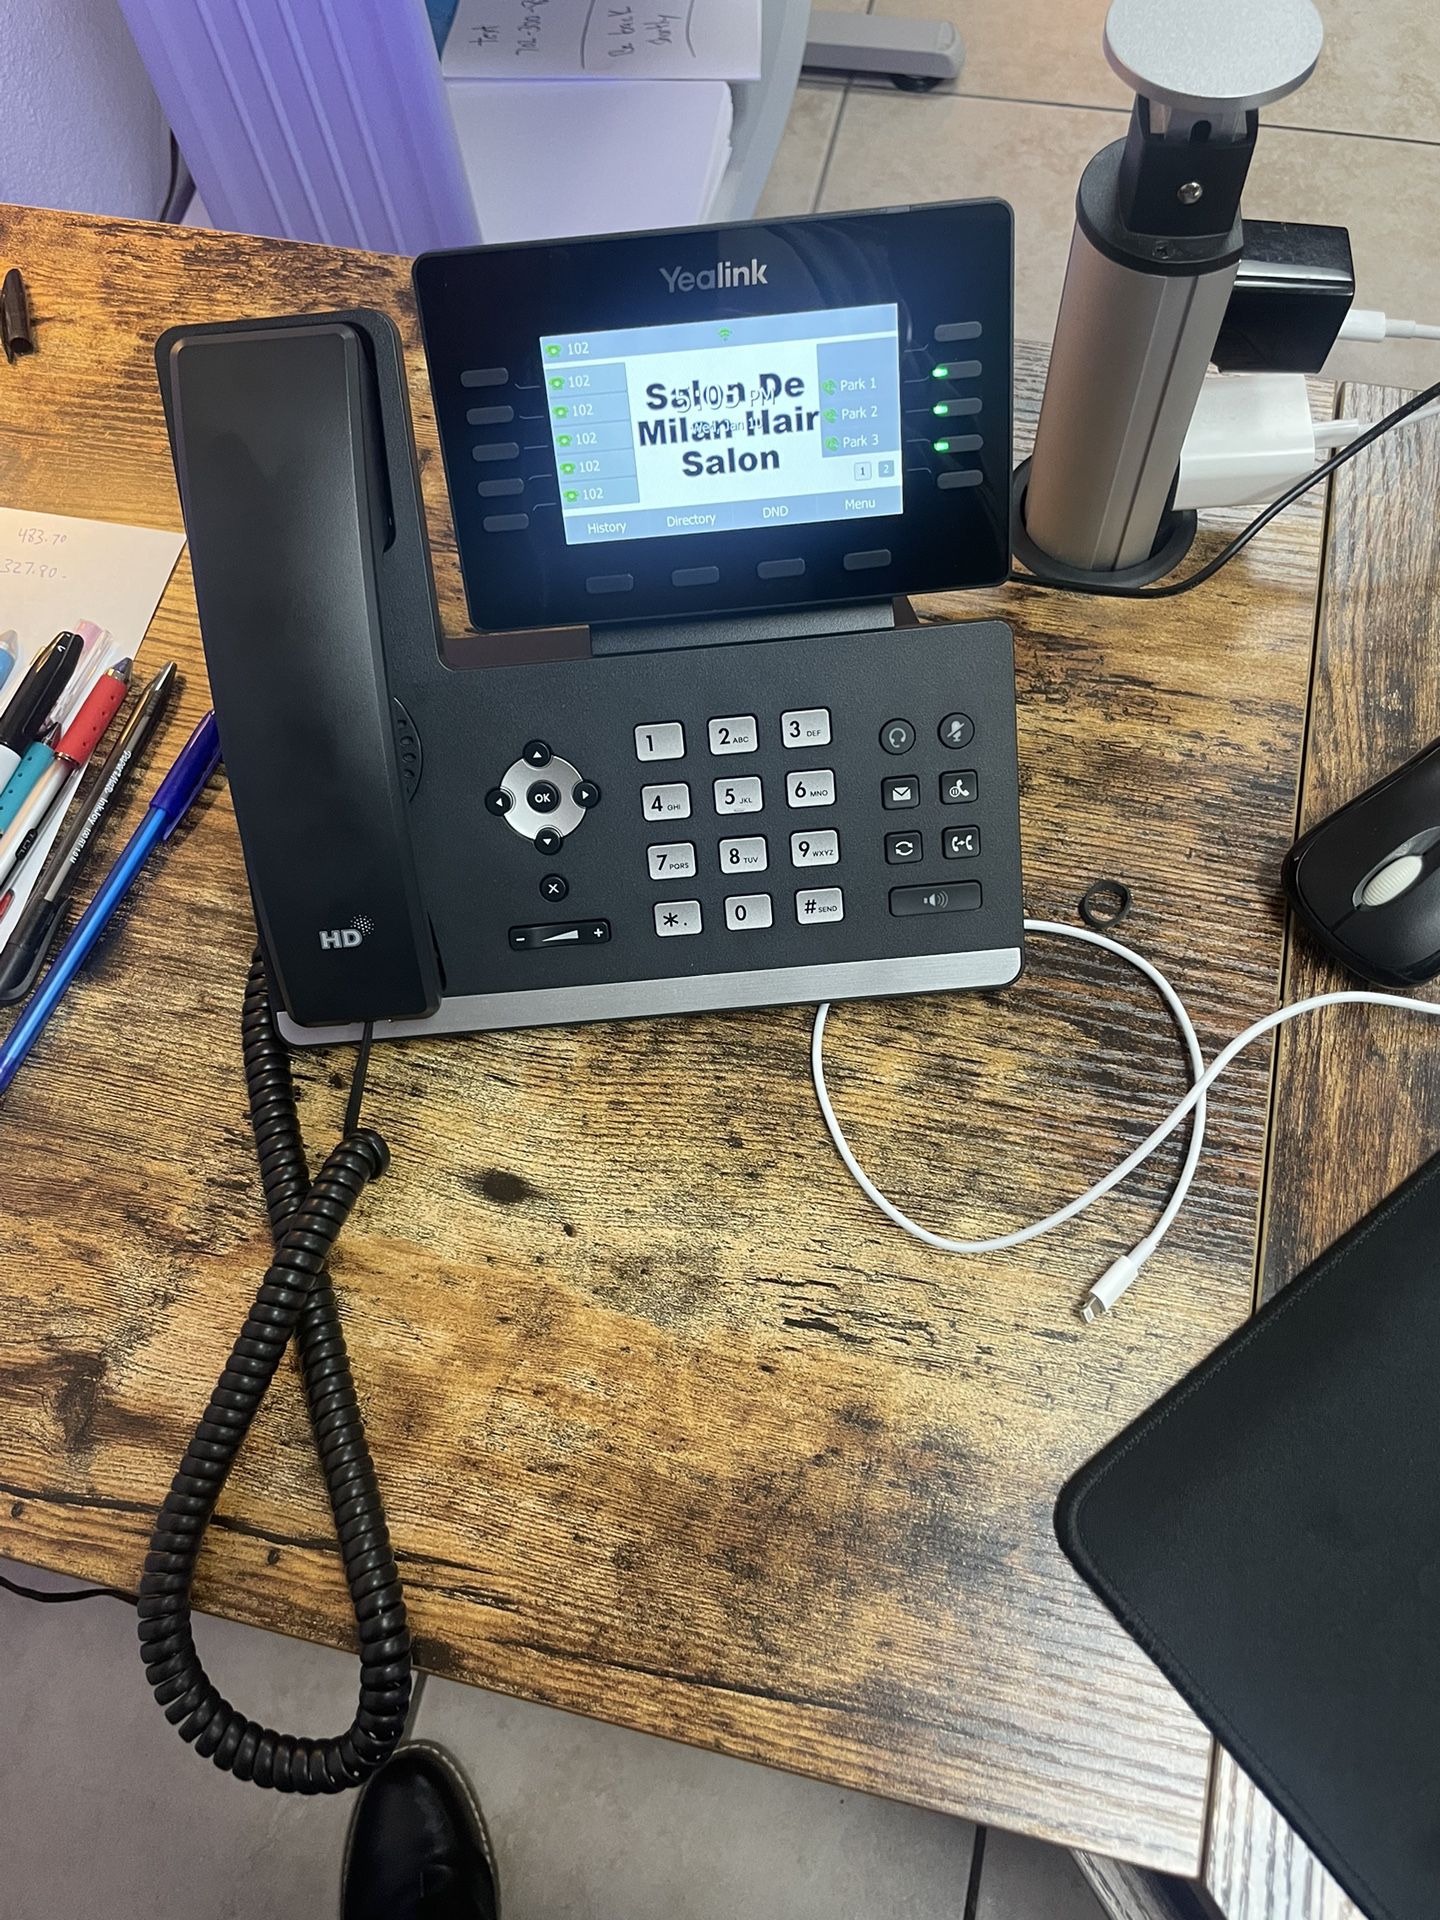 Yealink VOIP Phone - Safe Commercial Pickup Location